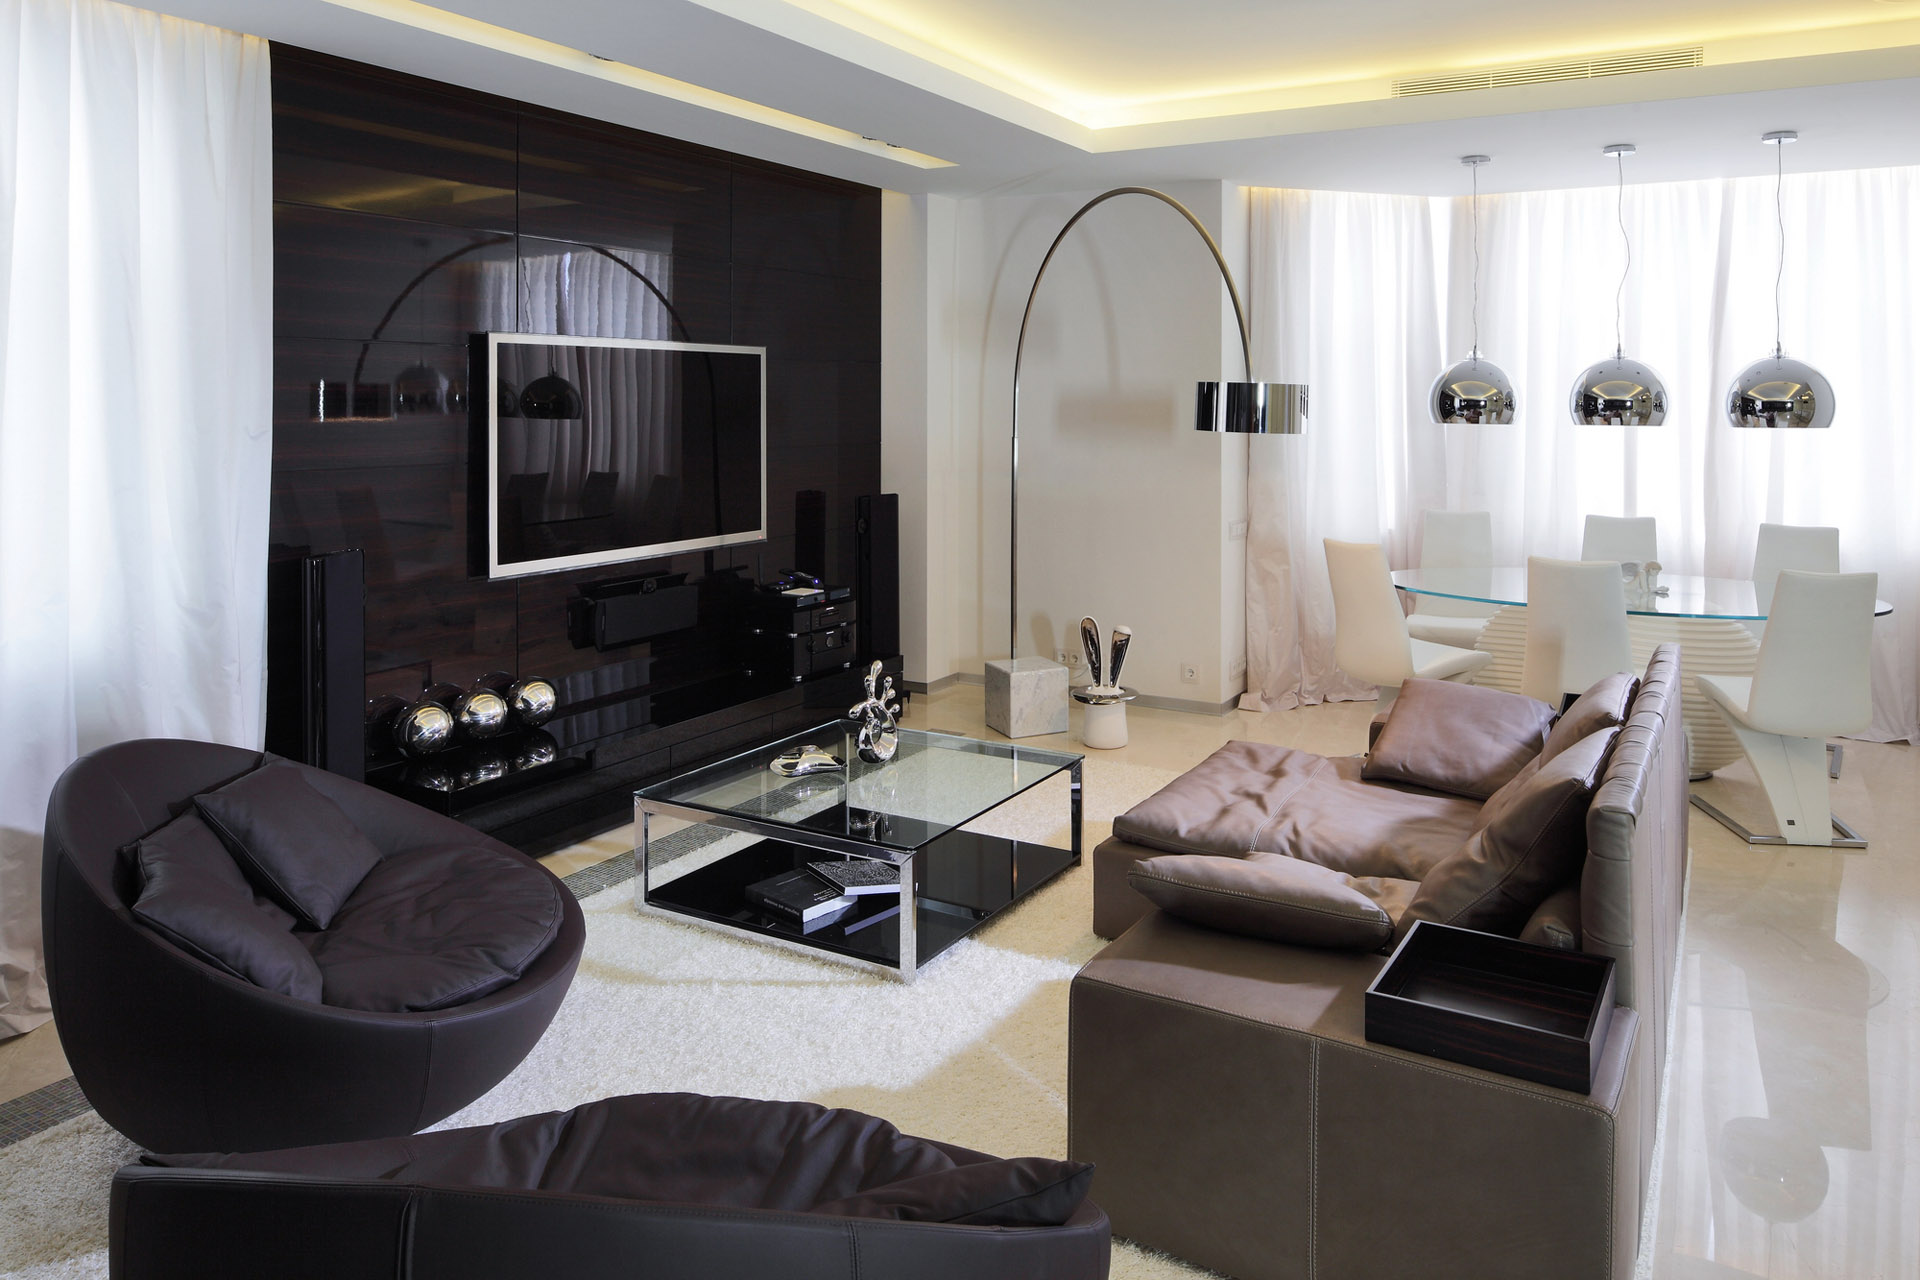 Modern Living Sofa Cool Modern Living Room With Sofa Bed And Glass Table Also Black Ball Living Room Chair Furnished With Flat Screen TV And White Rug Completed With Curved Flooring Stand Lamp Living Room Perfect Living Room Chair Design